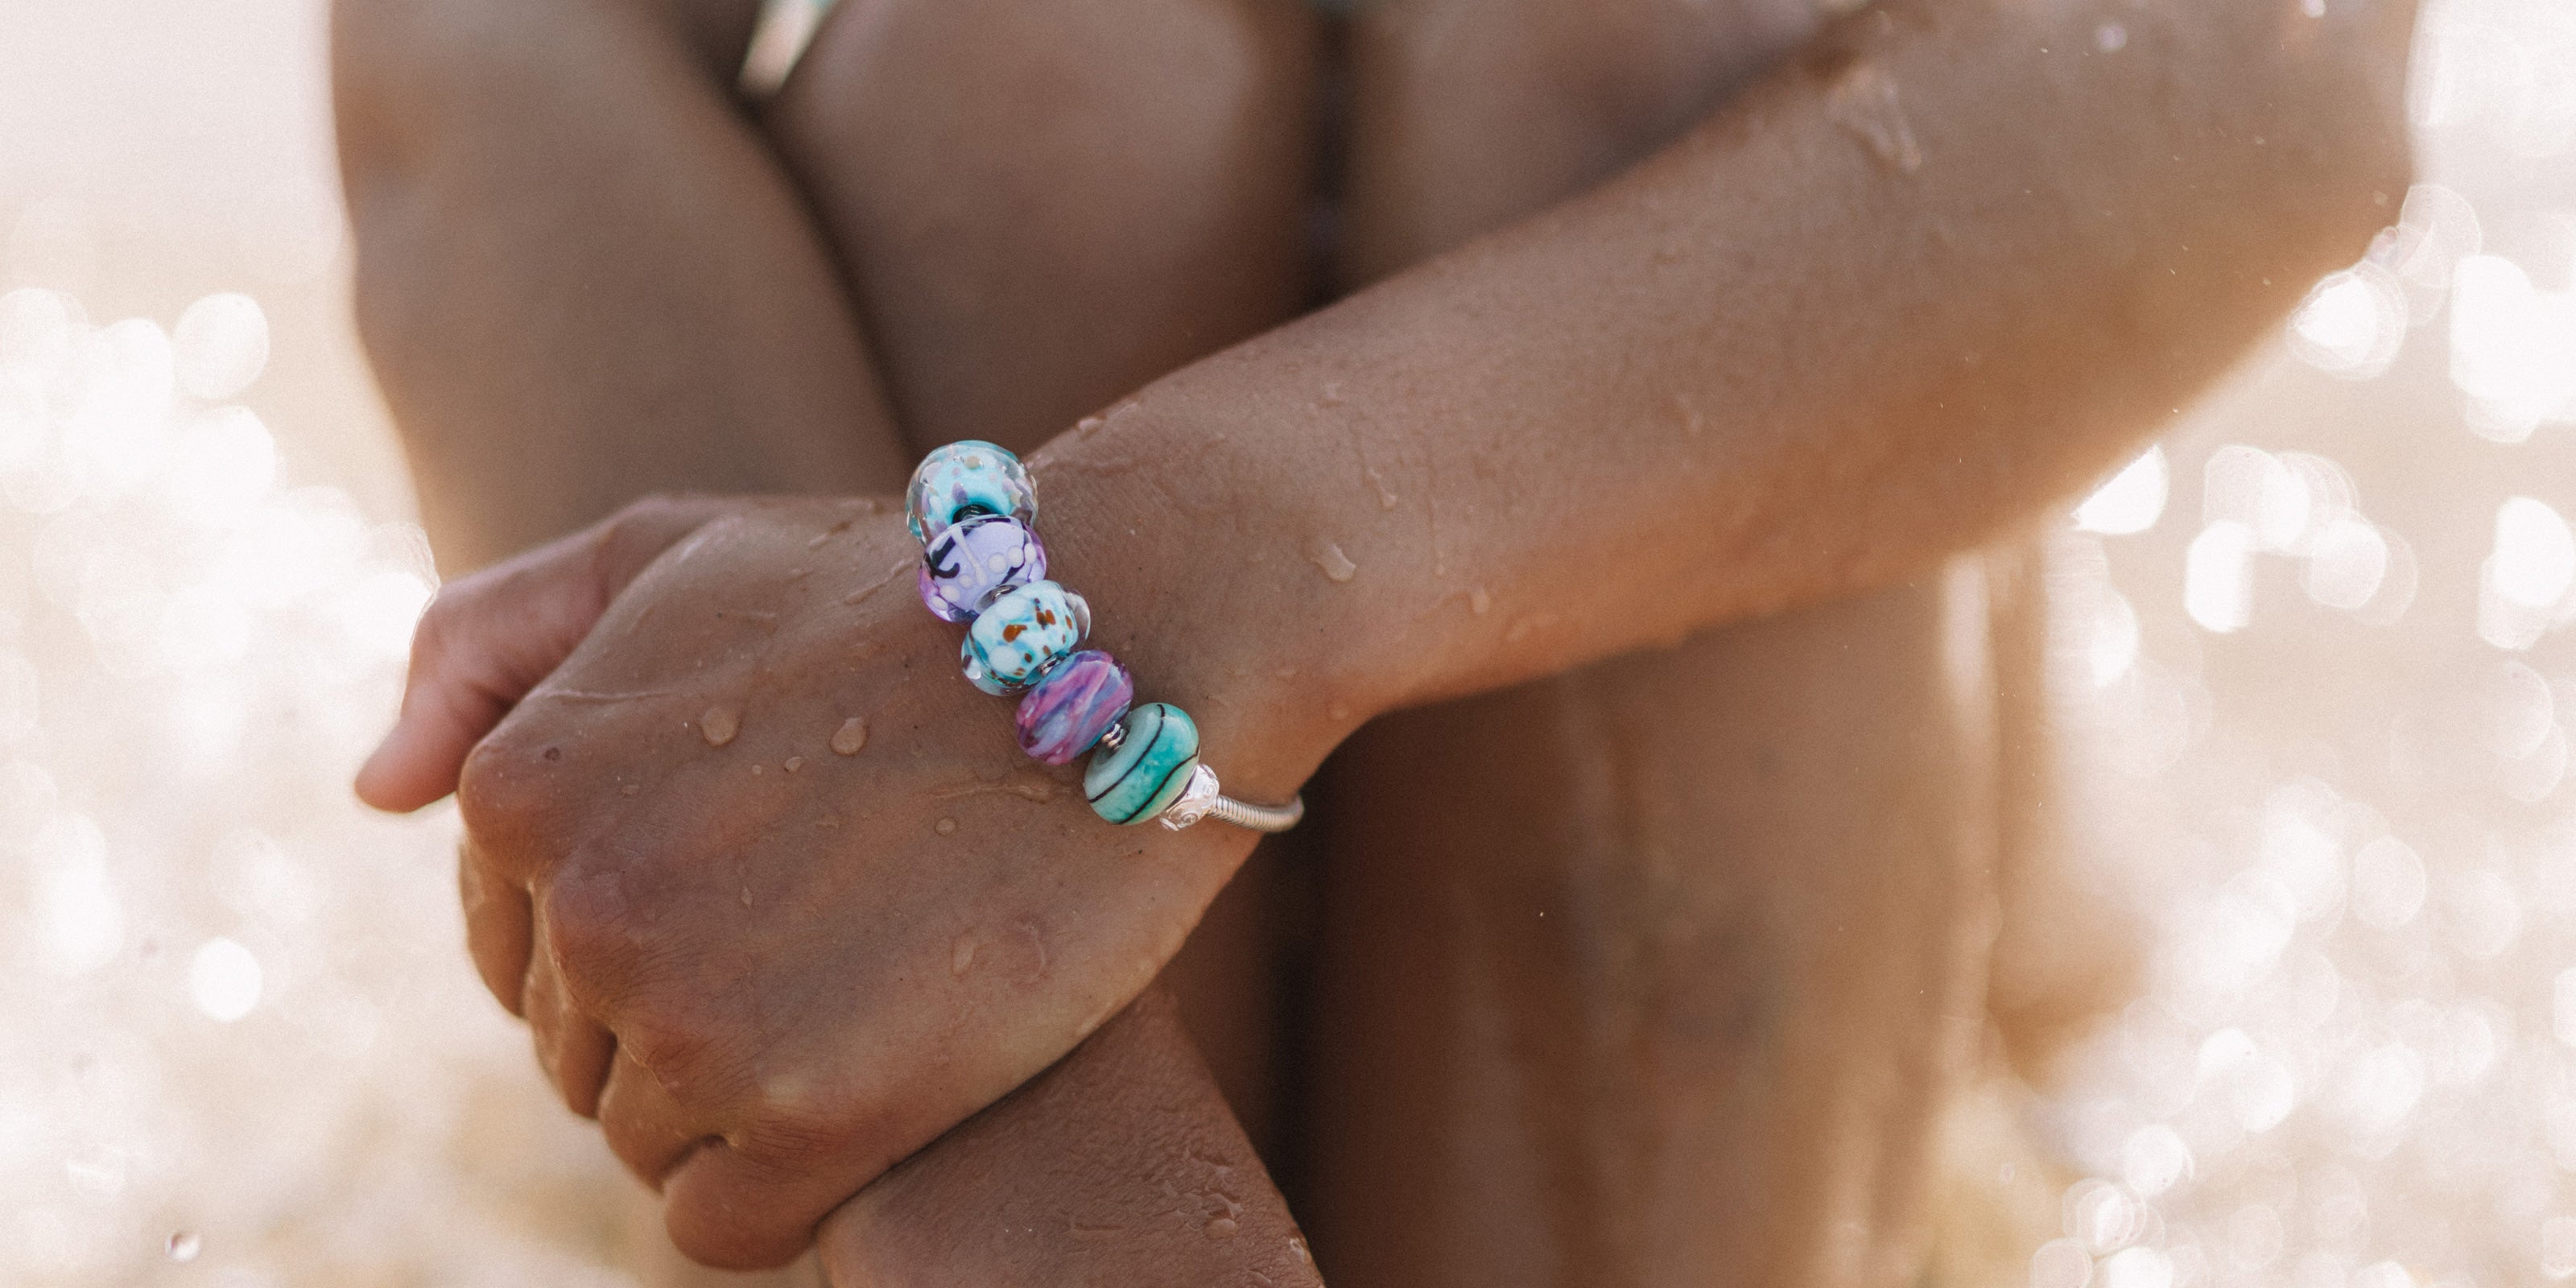 Green, blue and purple glass beads worn on silver snake chain bracelet by surfer girl at beach.